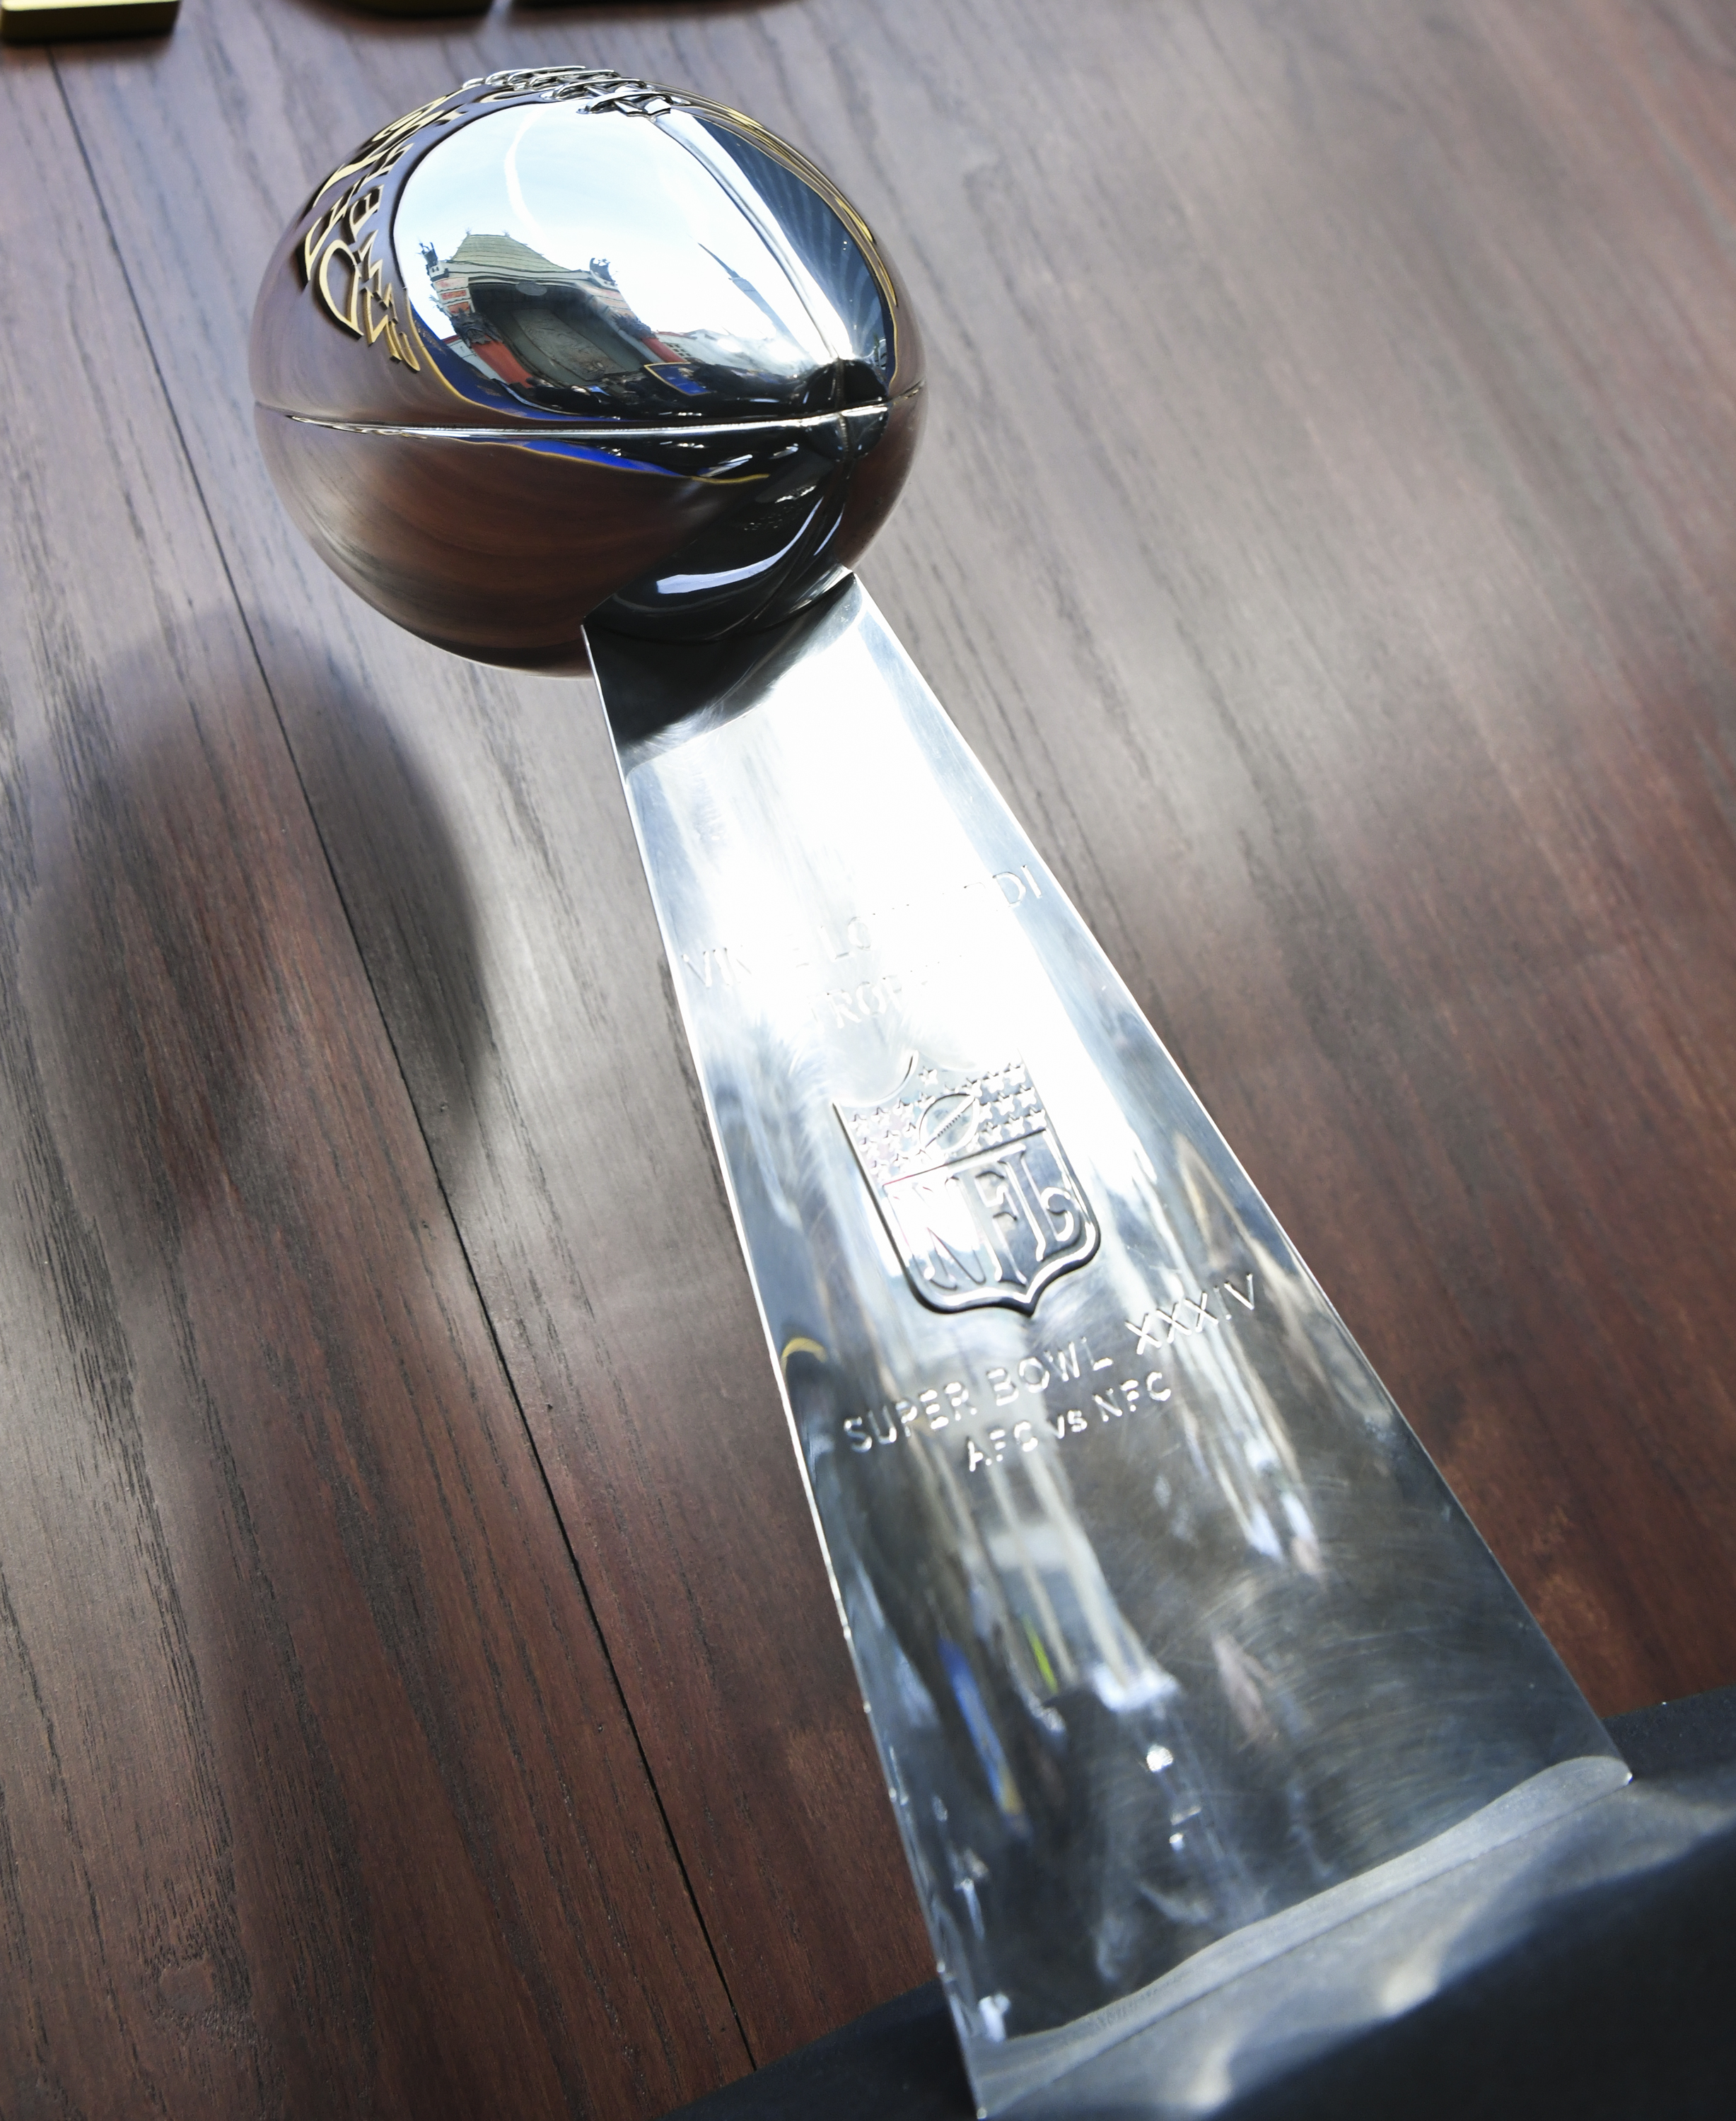 A general view of the Lombardi Trophy during the Los Angeles premiere of Lionsgate’s “American Underdog” at TCL Chinese Theatre on December 15, 2021 in Hollywood, California.